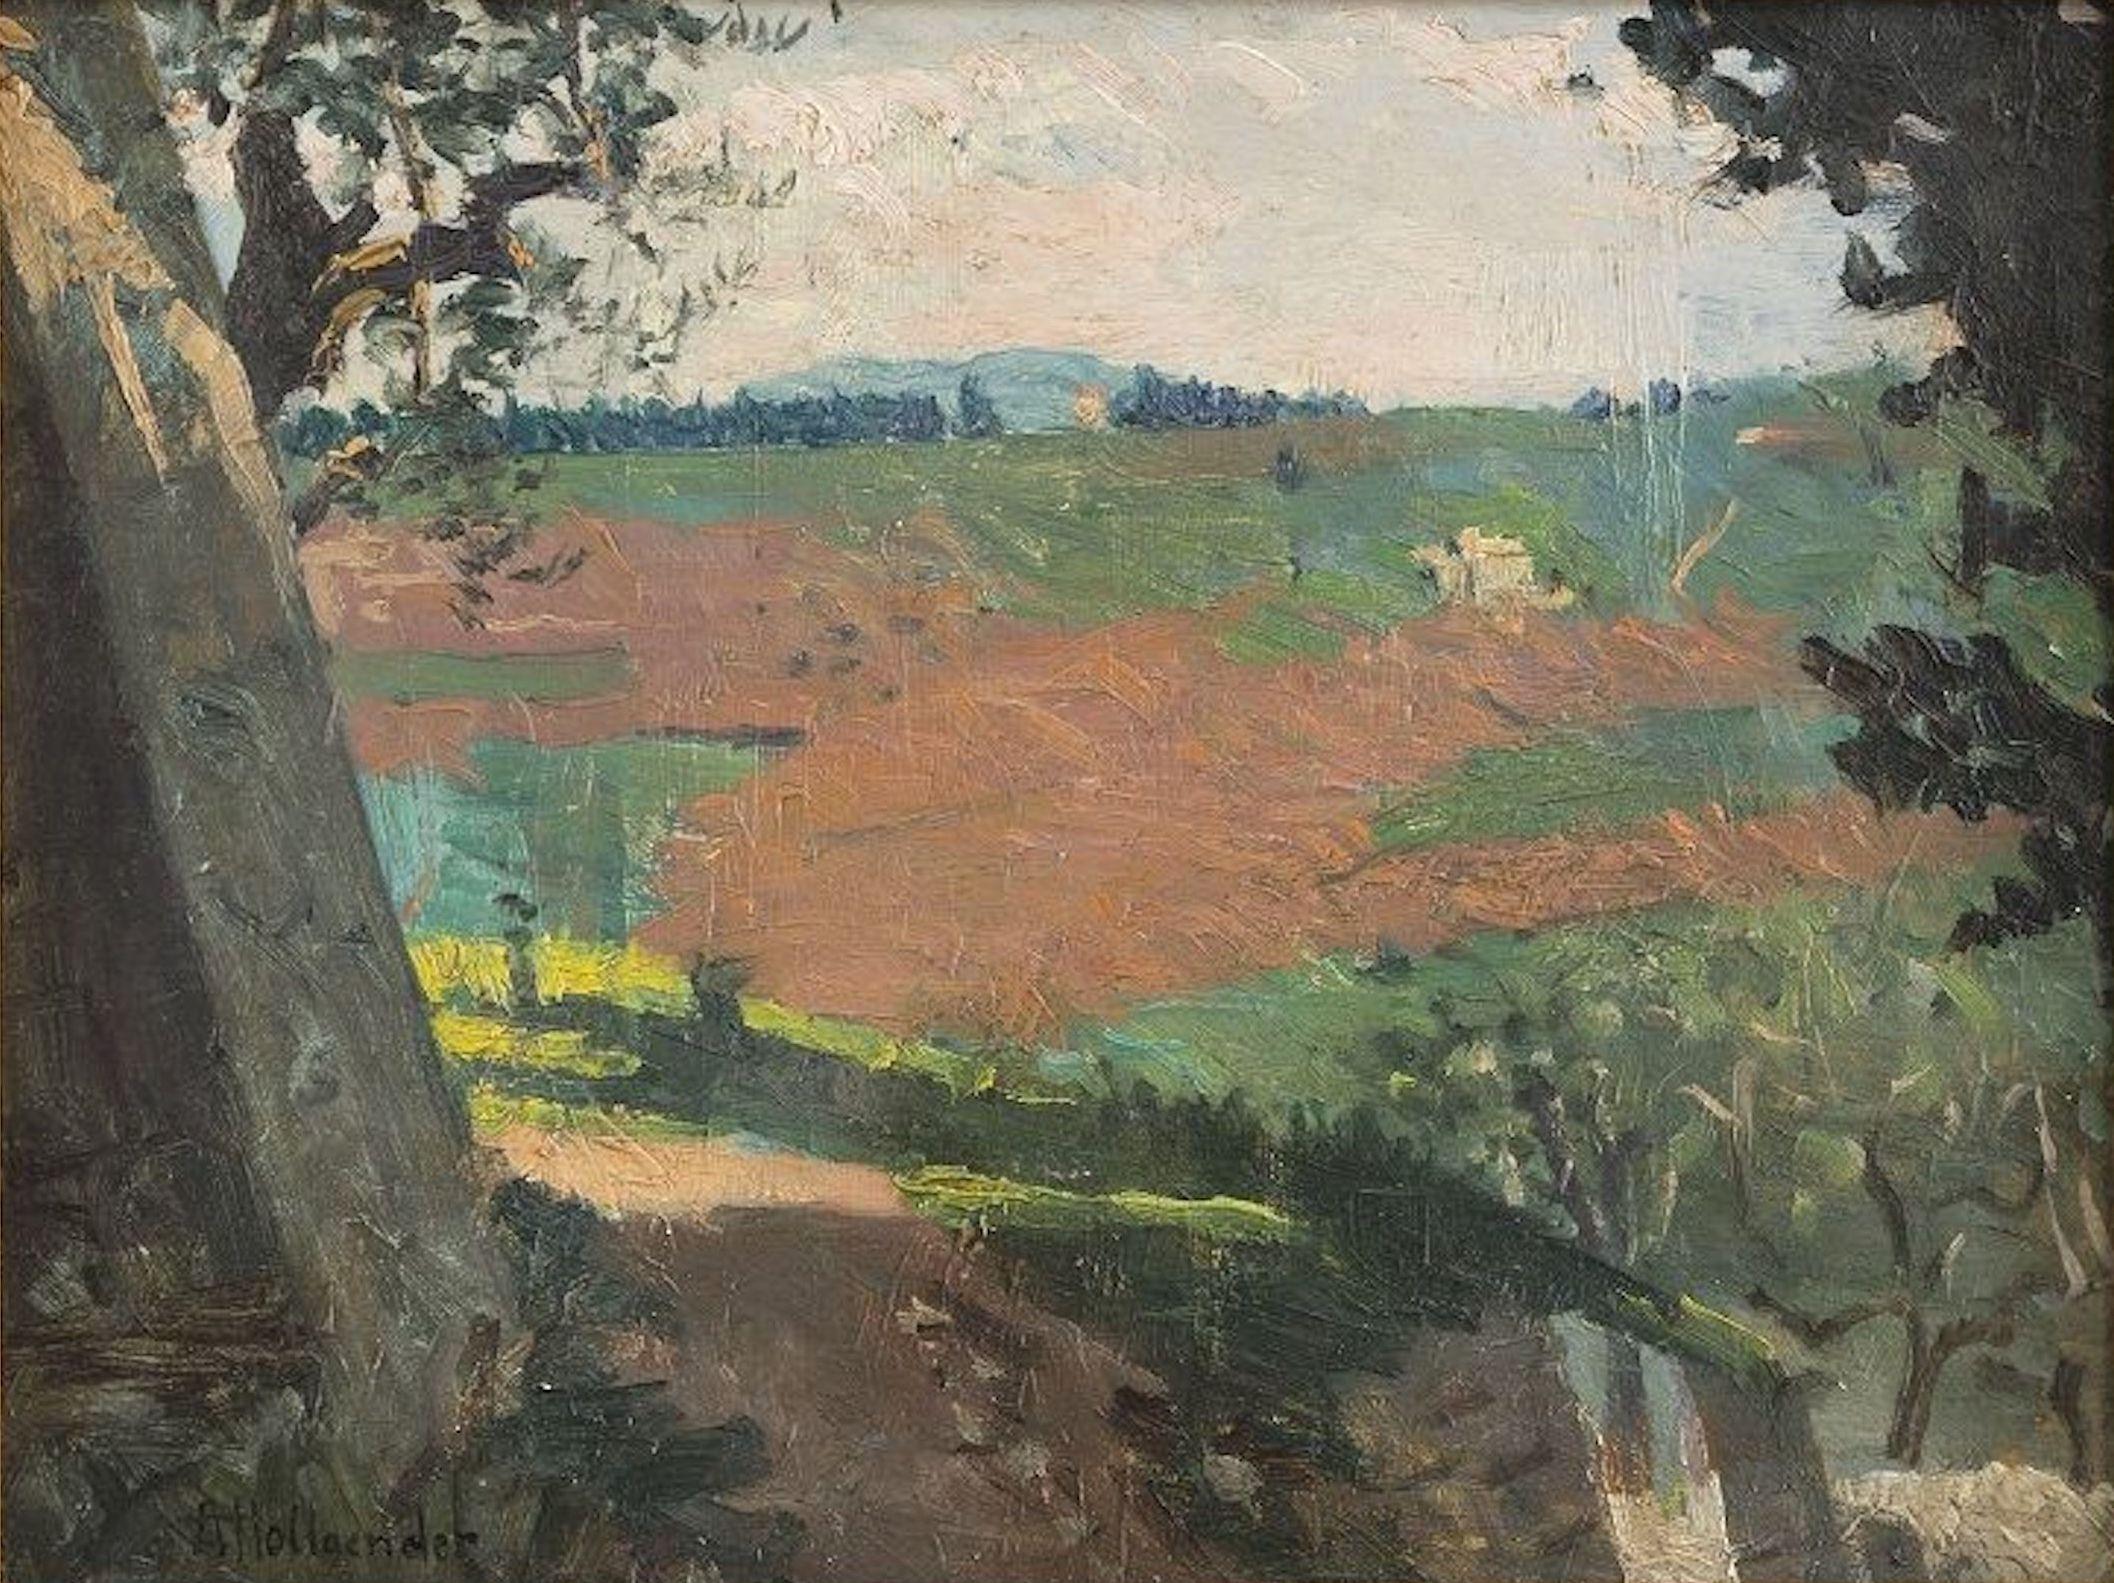 Alfonso Hollaender Landscape Painting - Landscape - Oil on Cardboard by A. Hollaender - Late 19th Century